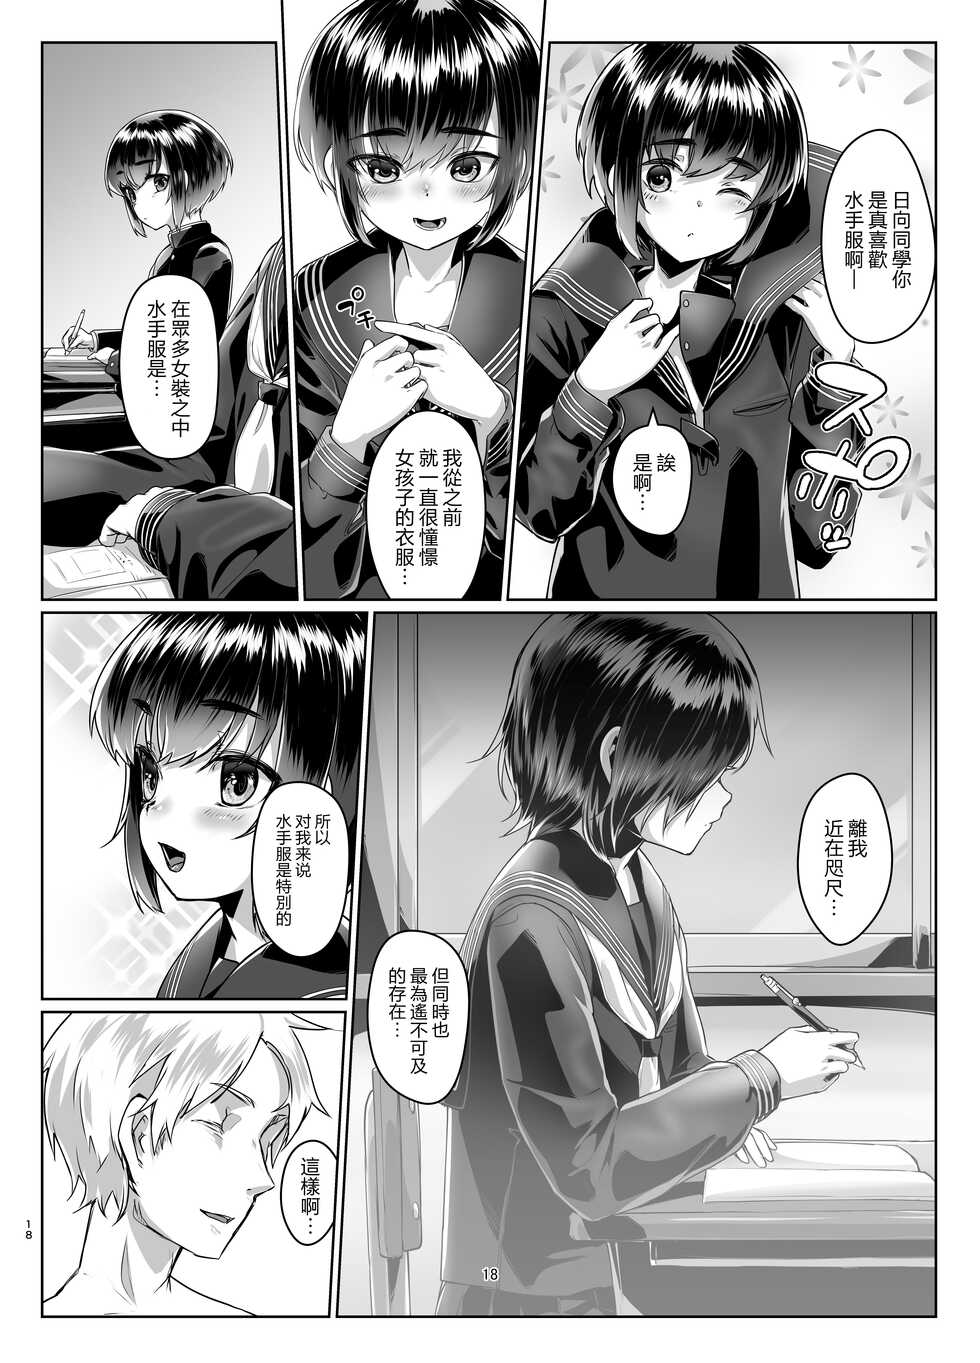 [face to face (ryoattoryo)] Tooi Hinata 2 [Chinese] [AX個人漢化] [Digital] - Page 18